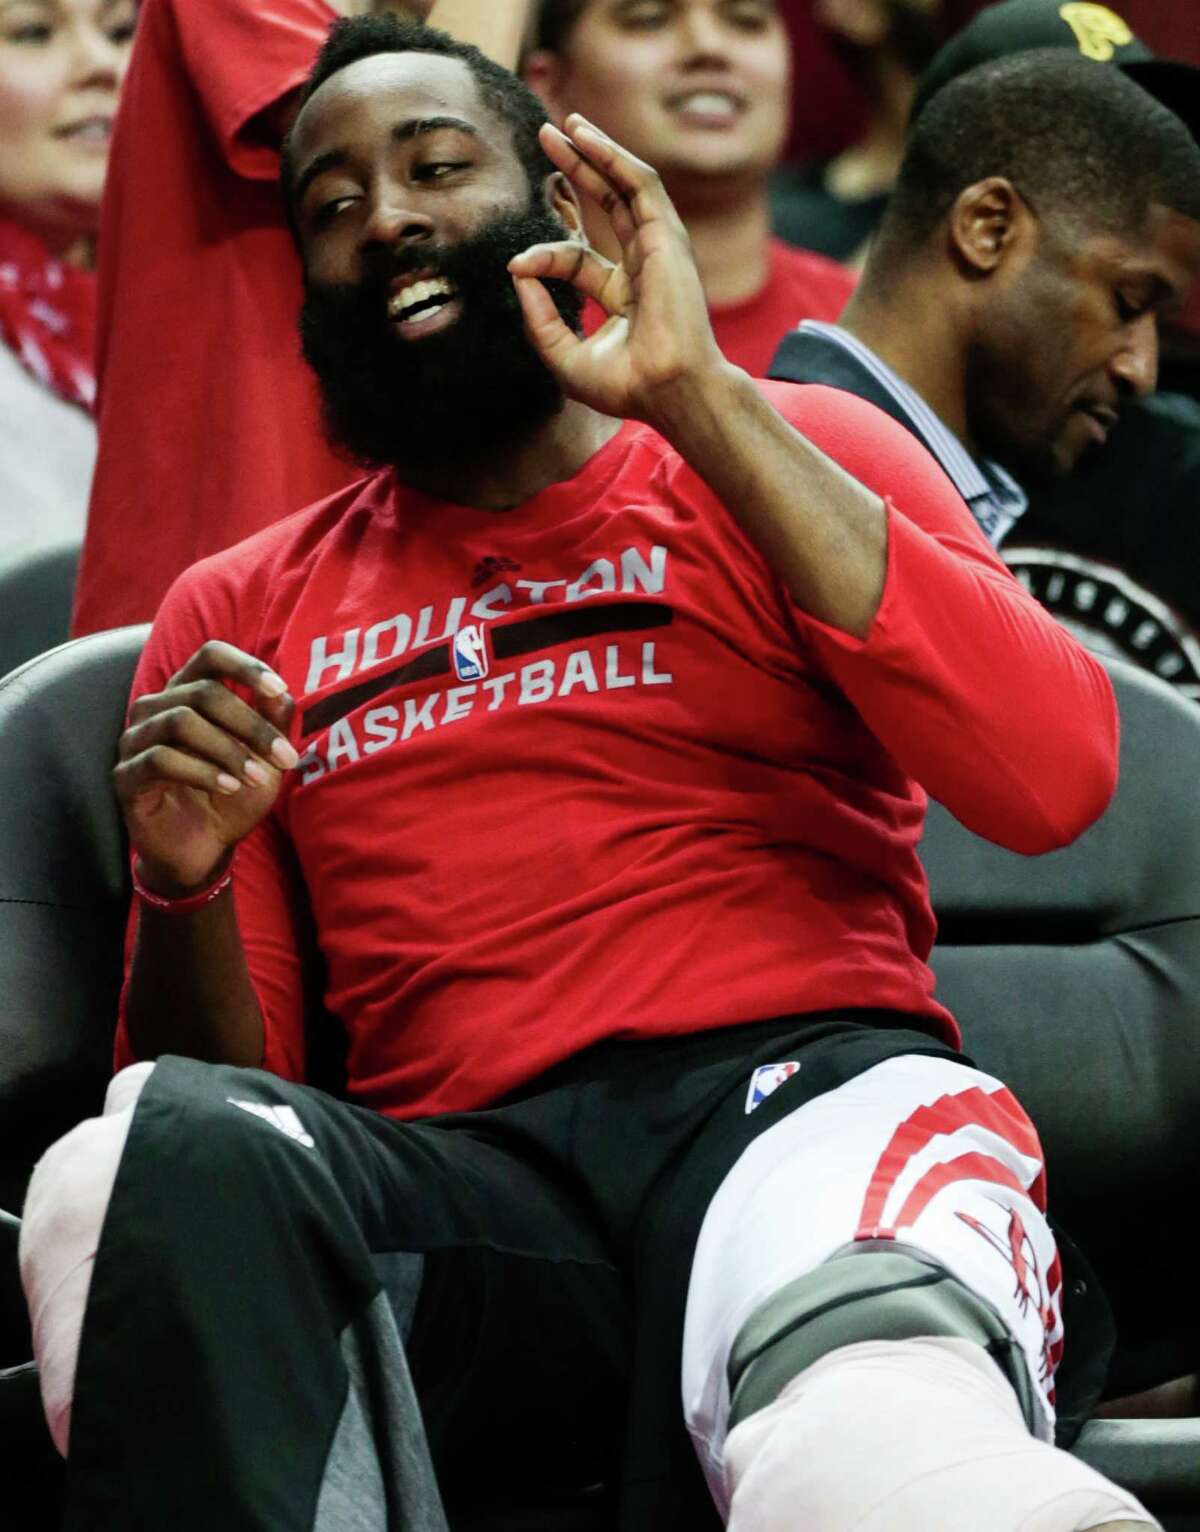 Houston Rockets guard James Harden (13) reacts after Rockets forward Kyle Wiltjer (30) scored a 3-pointer against the Sacramento Kings during the second half of an NBA basketball game at Toyota Center on Wednesday, Dec. 14, 2016, in Houston. ( Brett Coomer / Houston Chronicle )